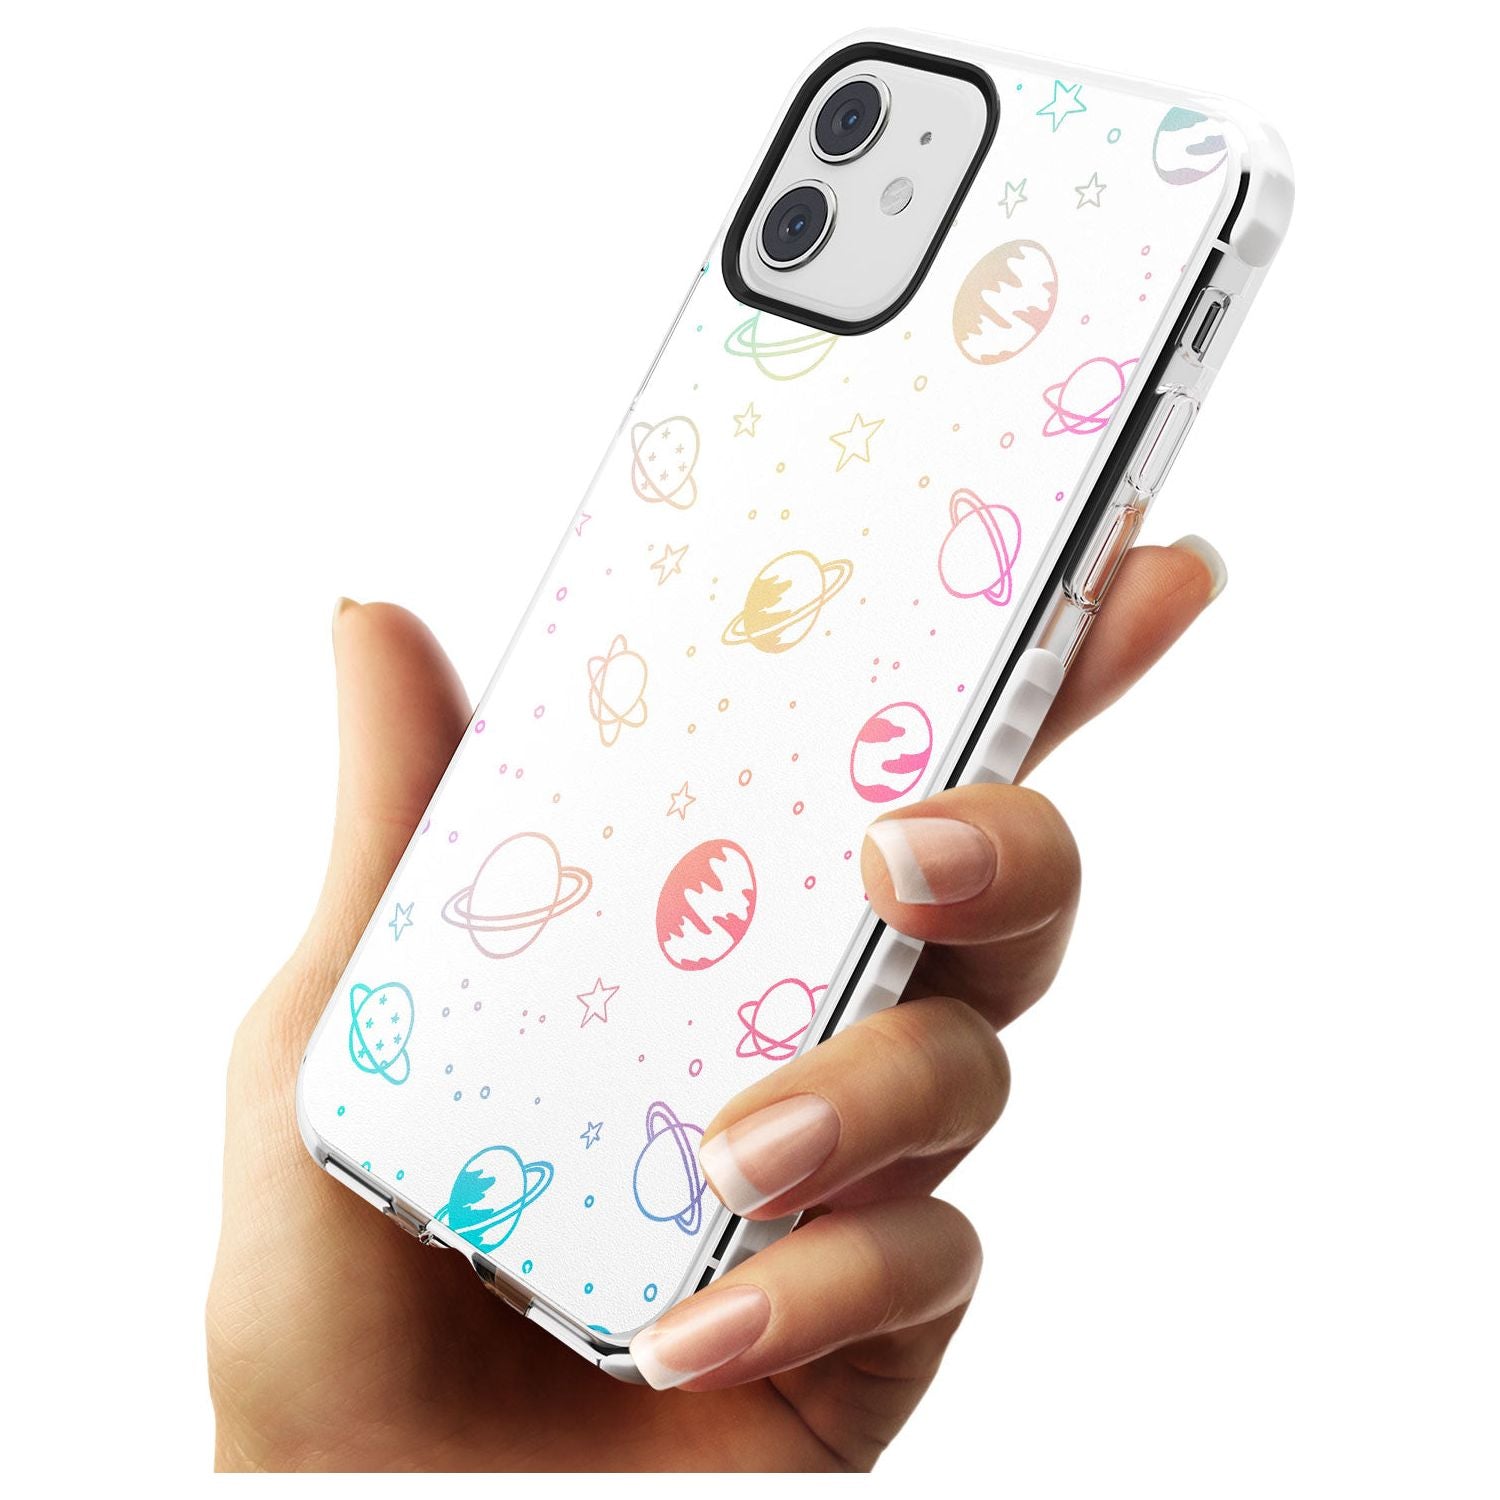 Outer Space Outlines: Pastels on White Slim TPU Phone Case for iPhone 11